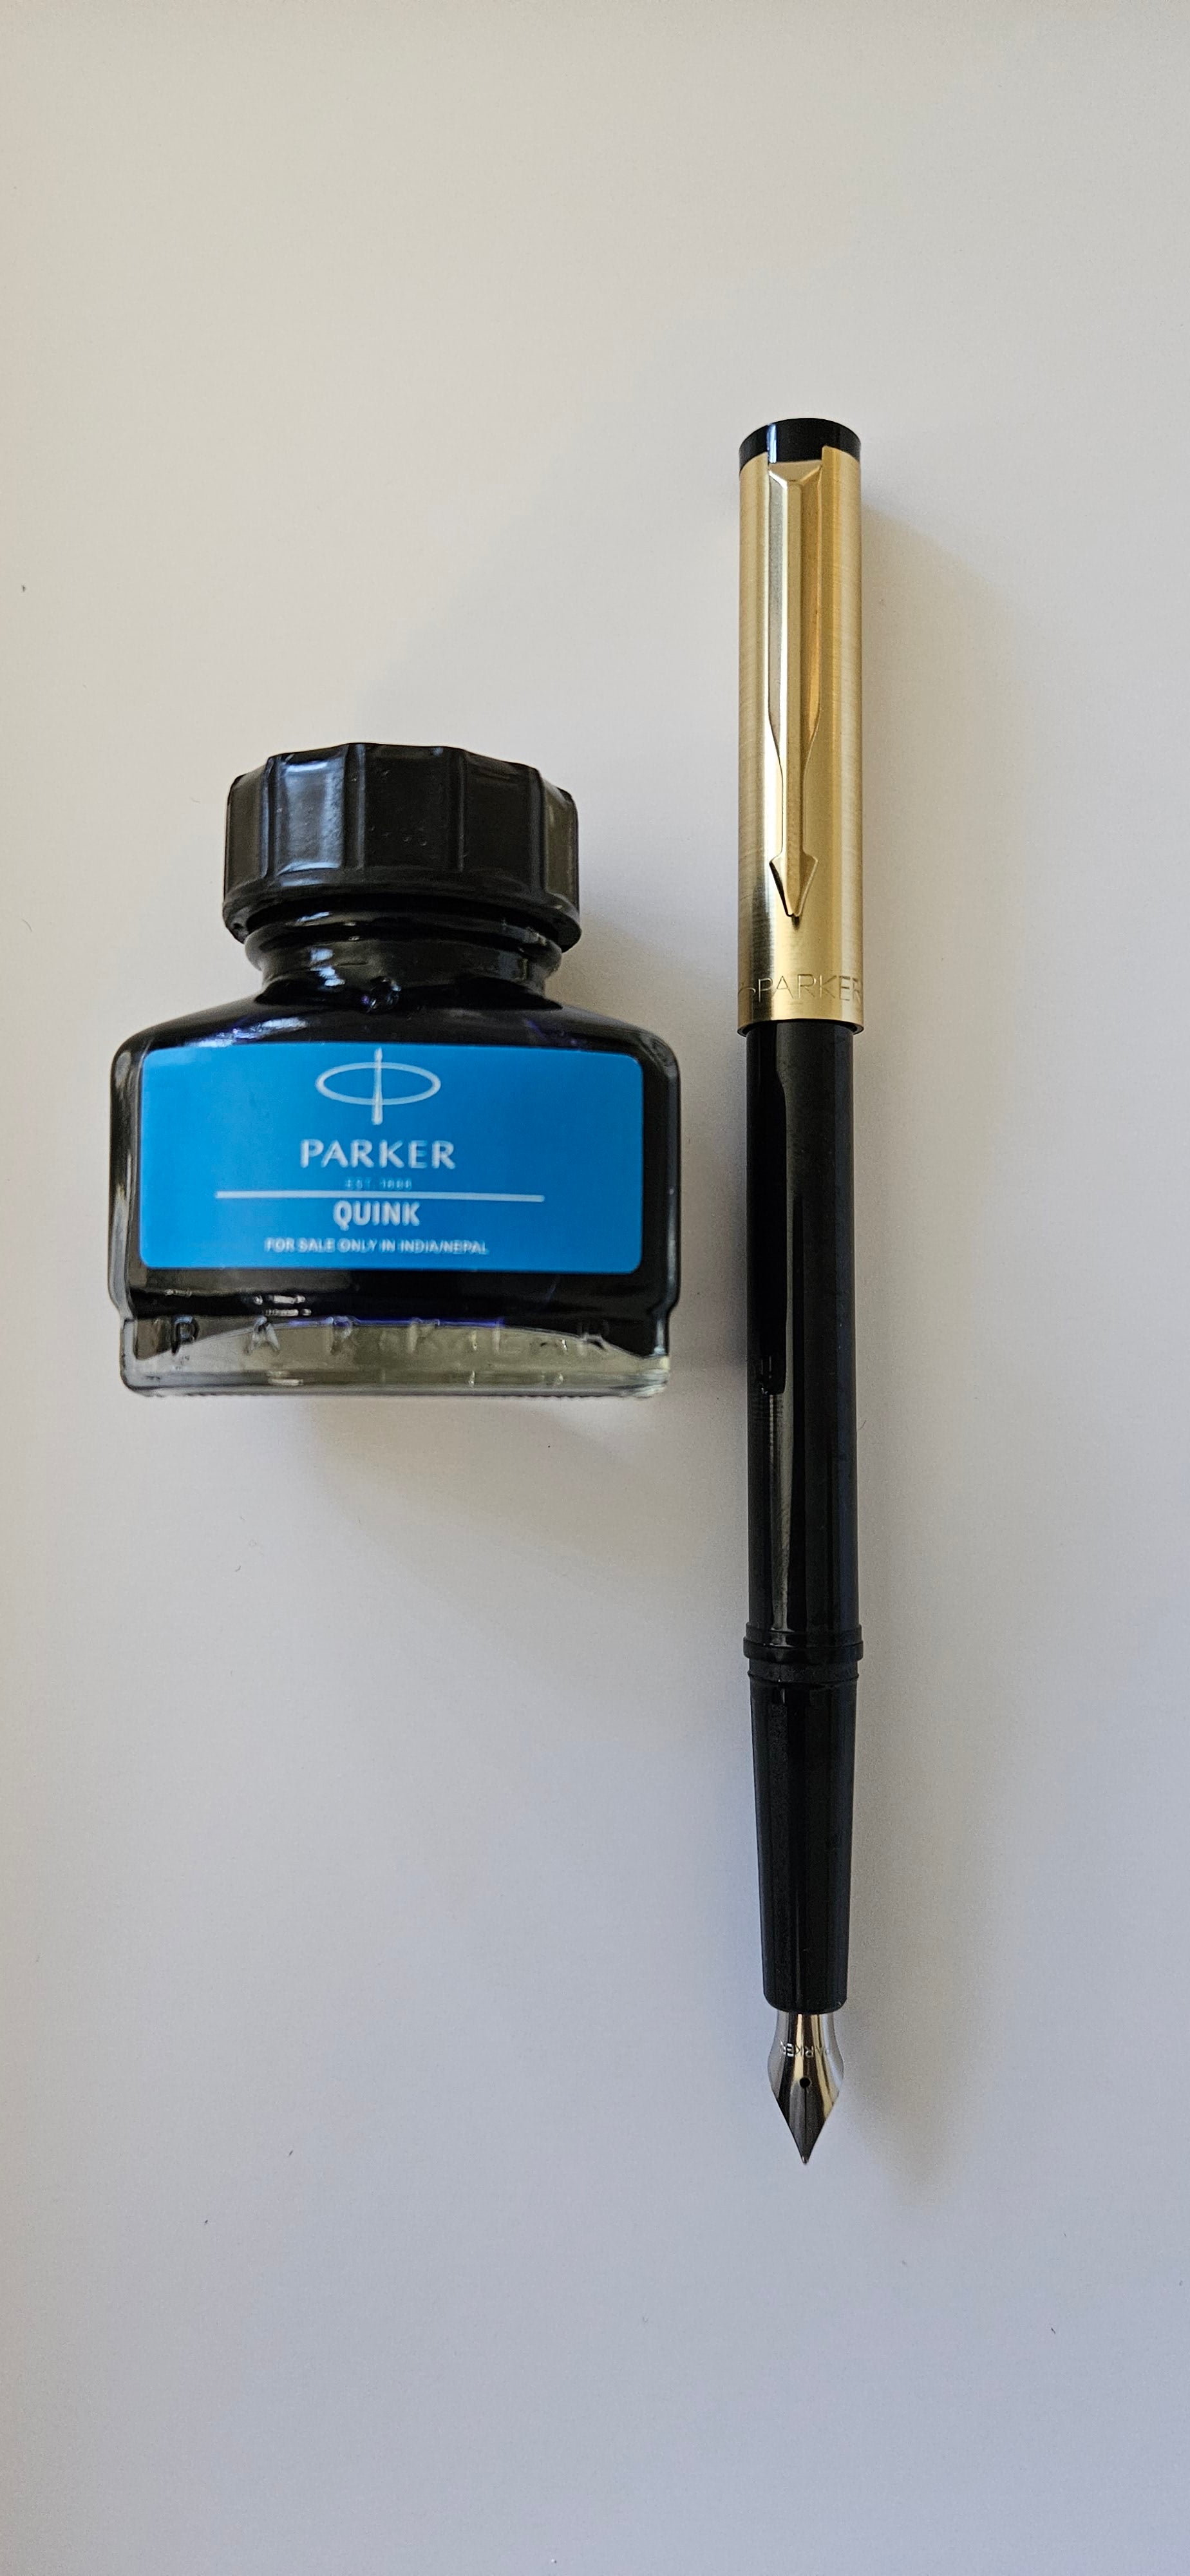 Parkers fountain pen and ink bottle